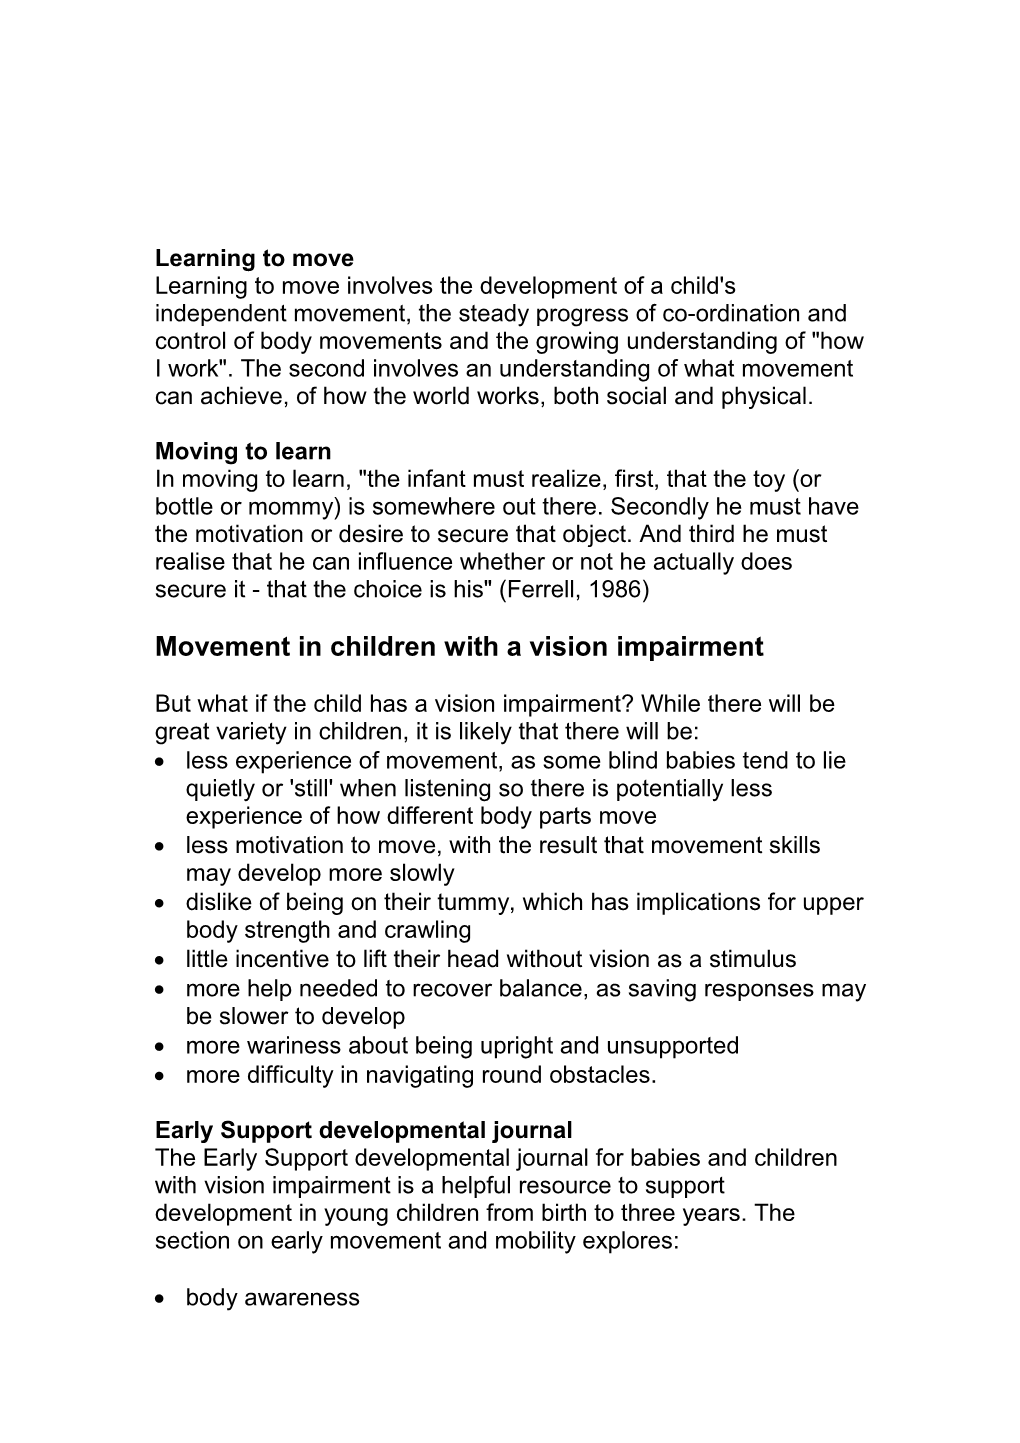 Mobility and Independence Early Years